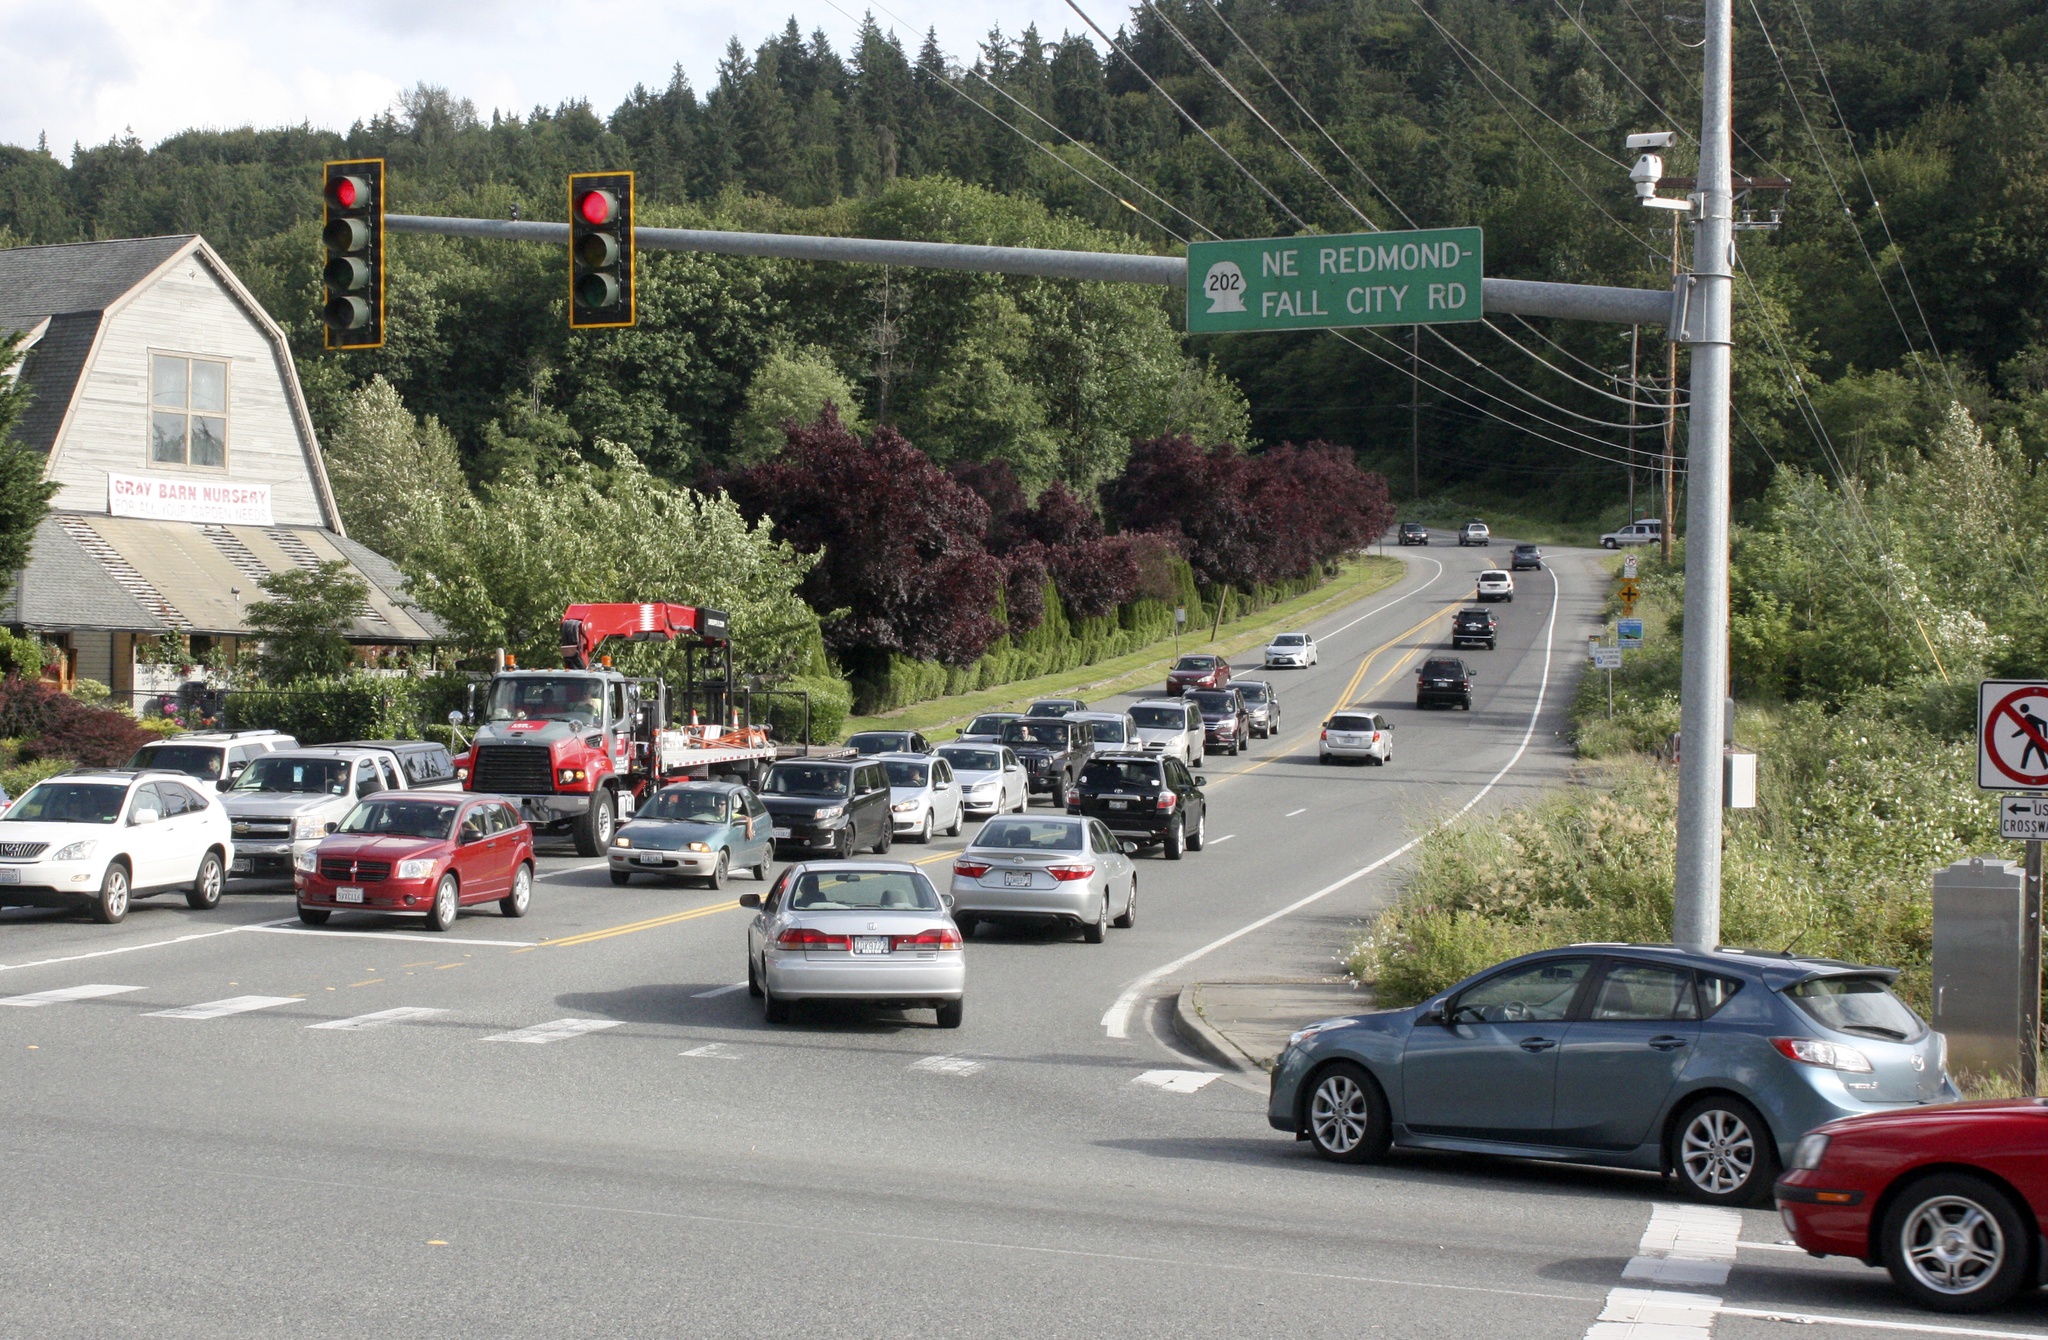 Megan Campbell/staff photoTraffic at 5:30 p.m. in Sammamish June 2 at Sahalee Way Northeast and State Route 202.